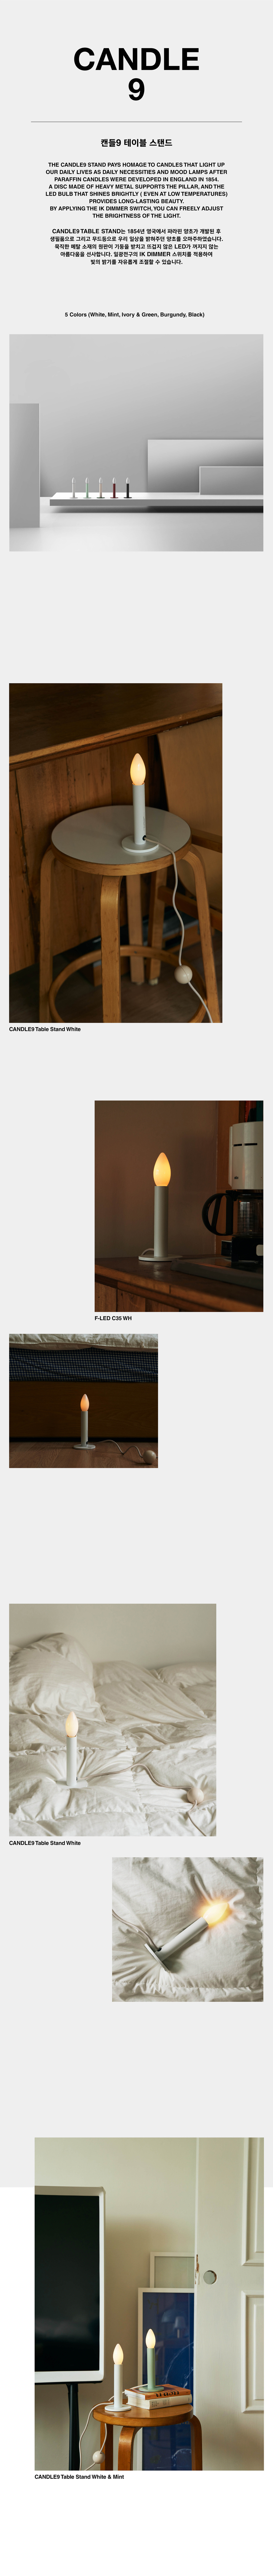 CANDLE9%20Table%20Stand_03a.jpg